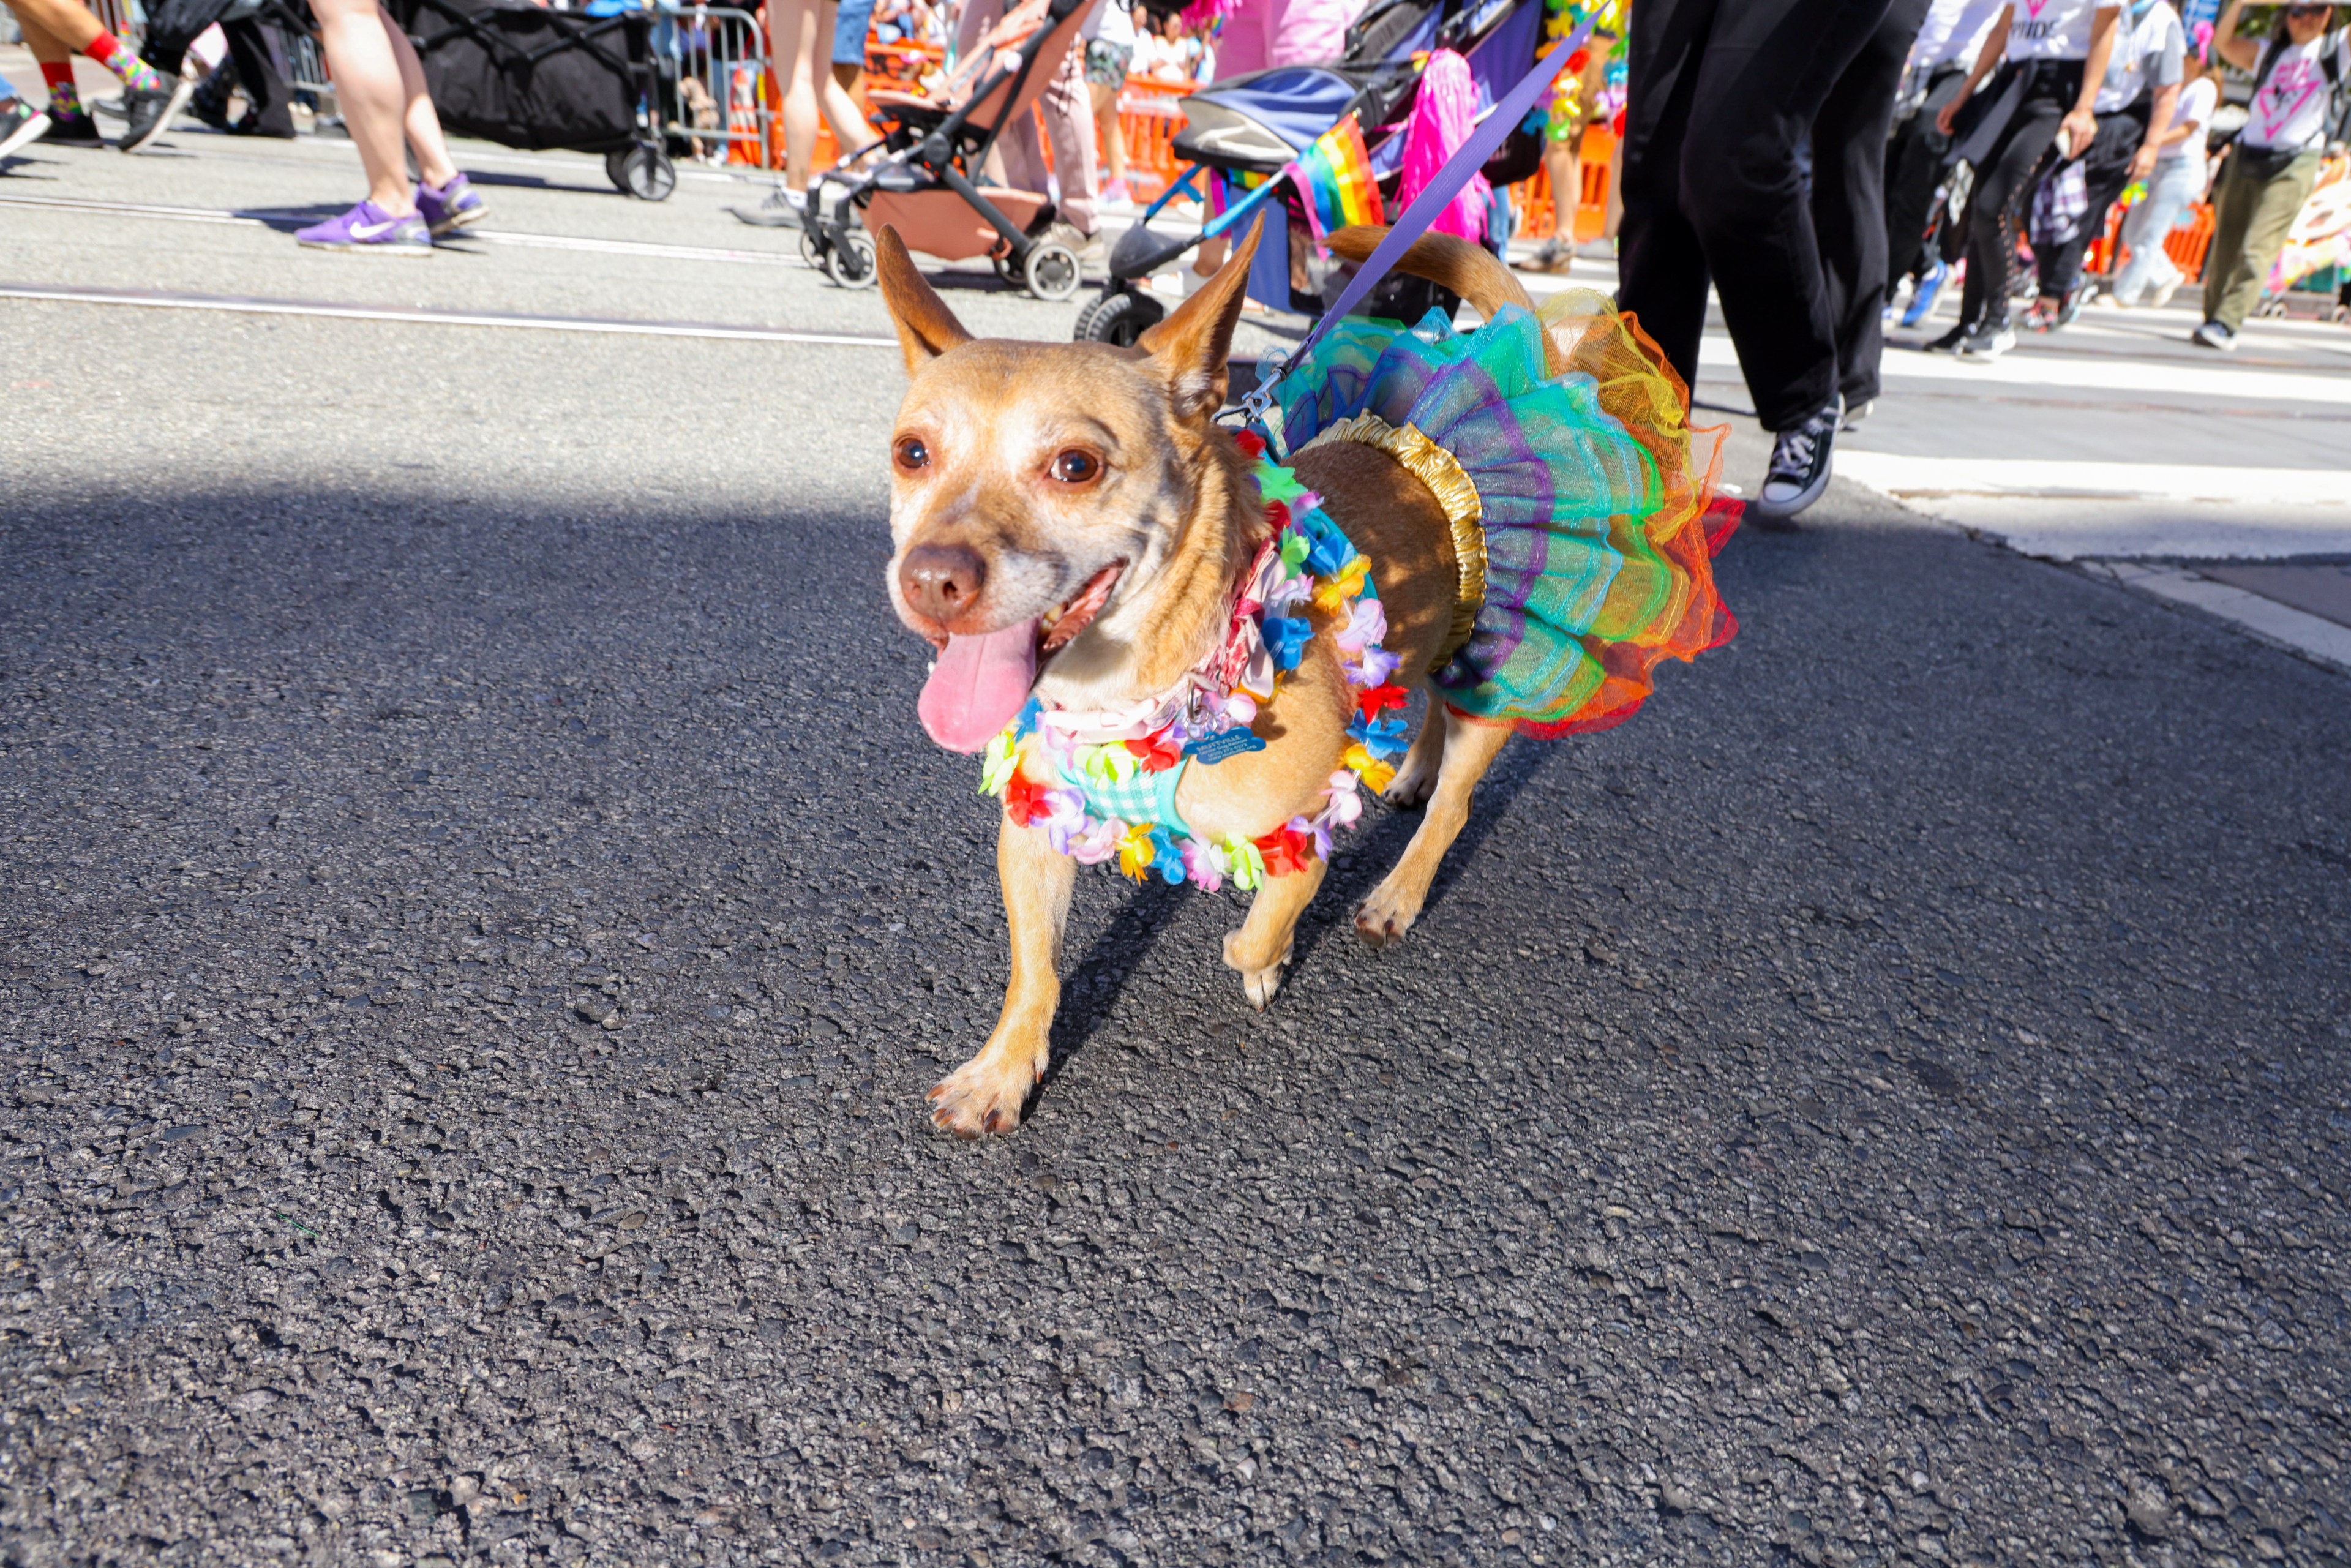 A small dog in a colorful tutu and flower necklace is walking on the street during a vibrant parade, with people and strollers visible in the background.